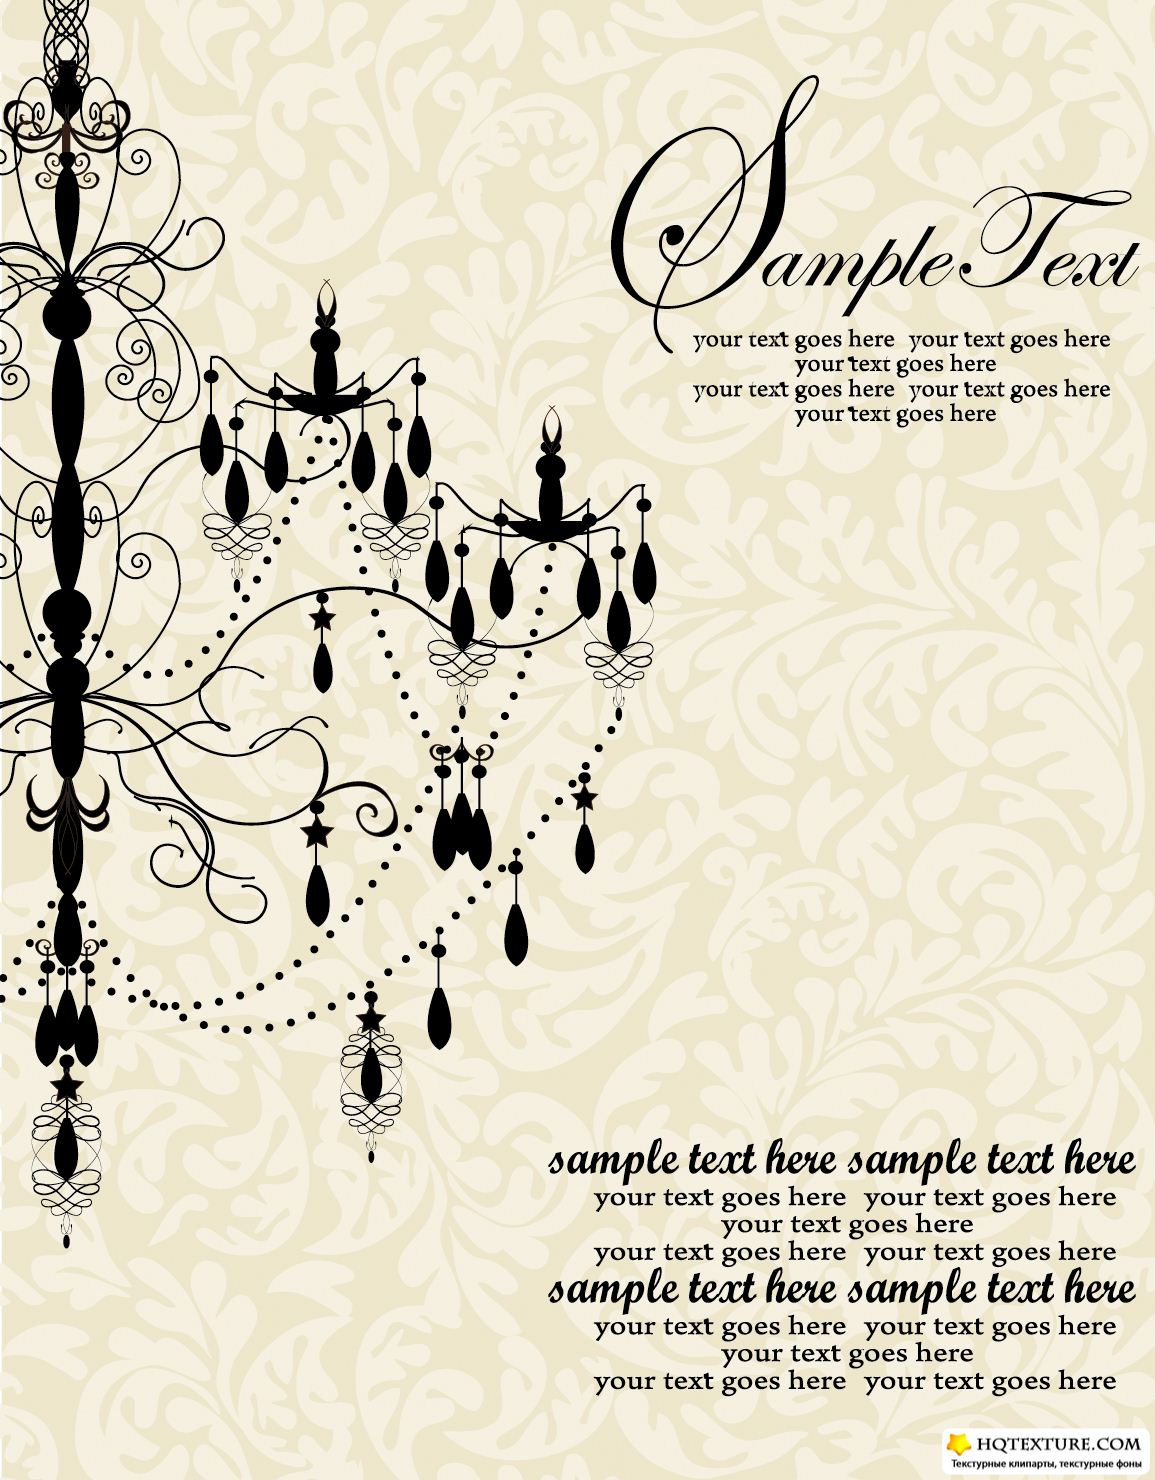 Vintage Background With Chandelier